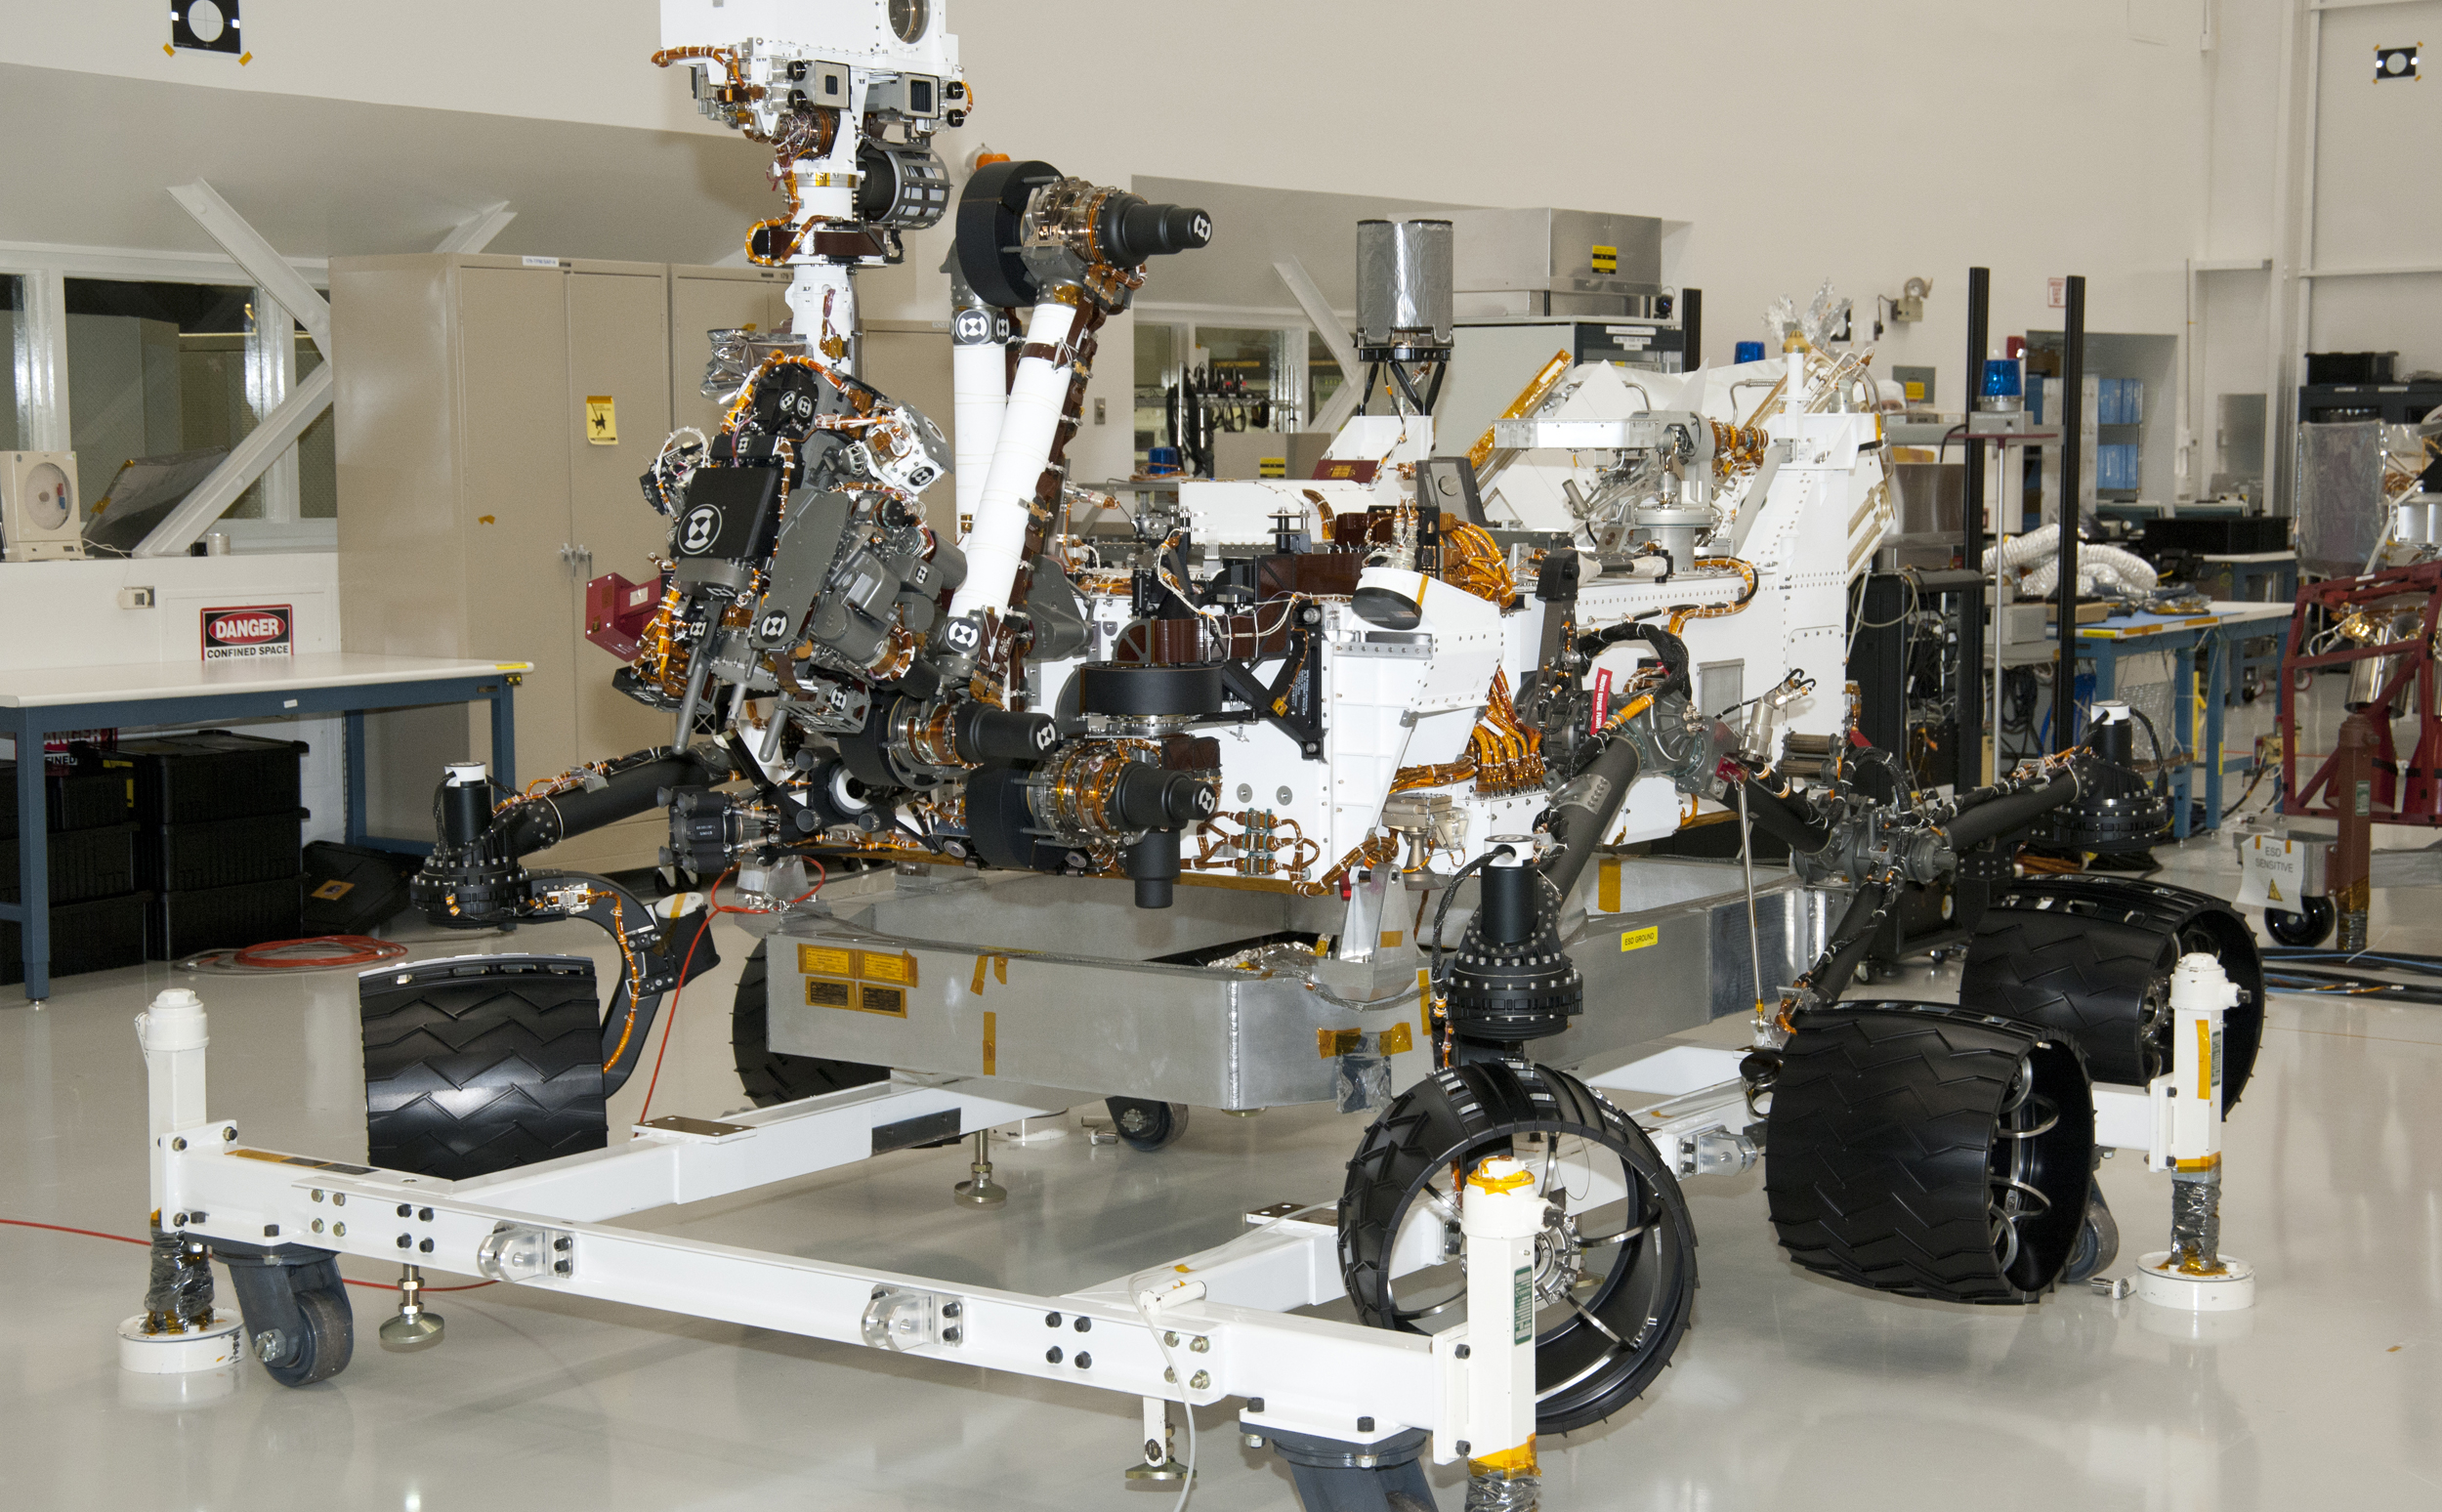 NASA Mars Rover Curiosity at JPL, View from Front Left Corner